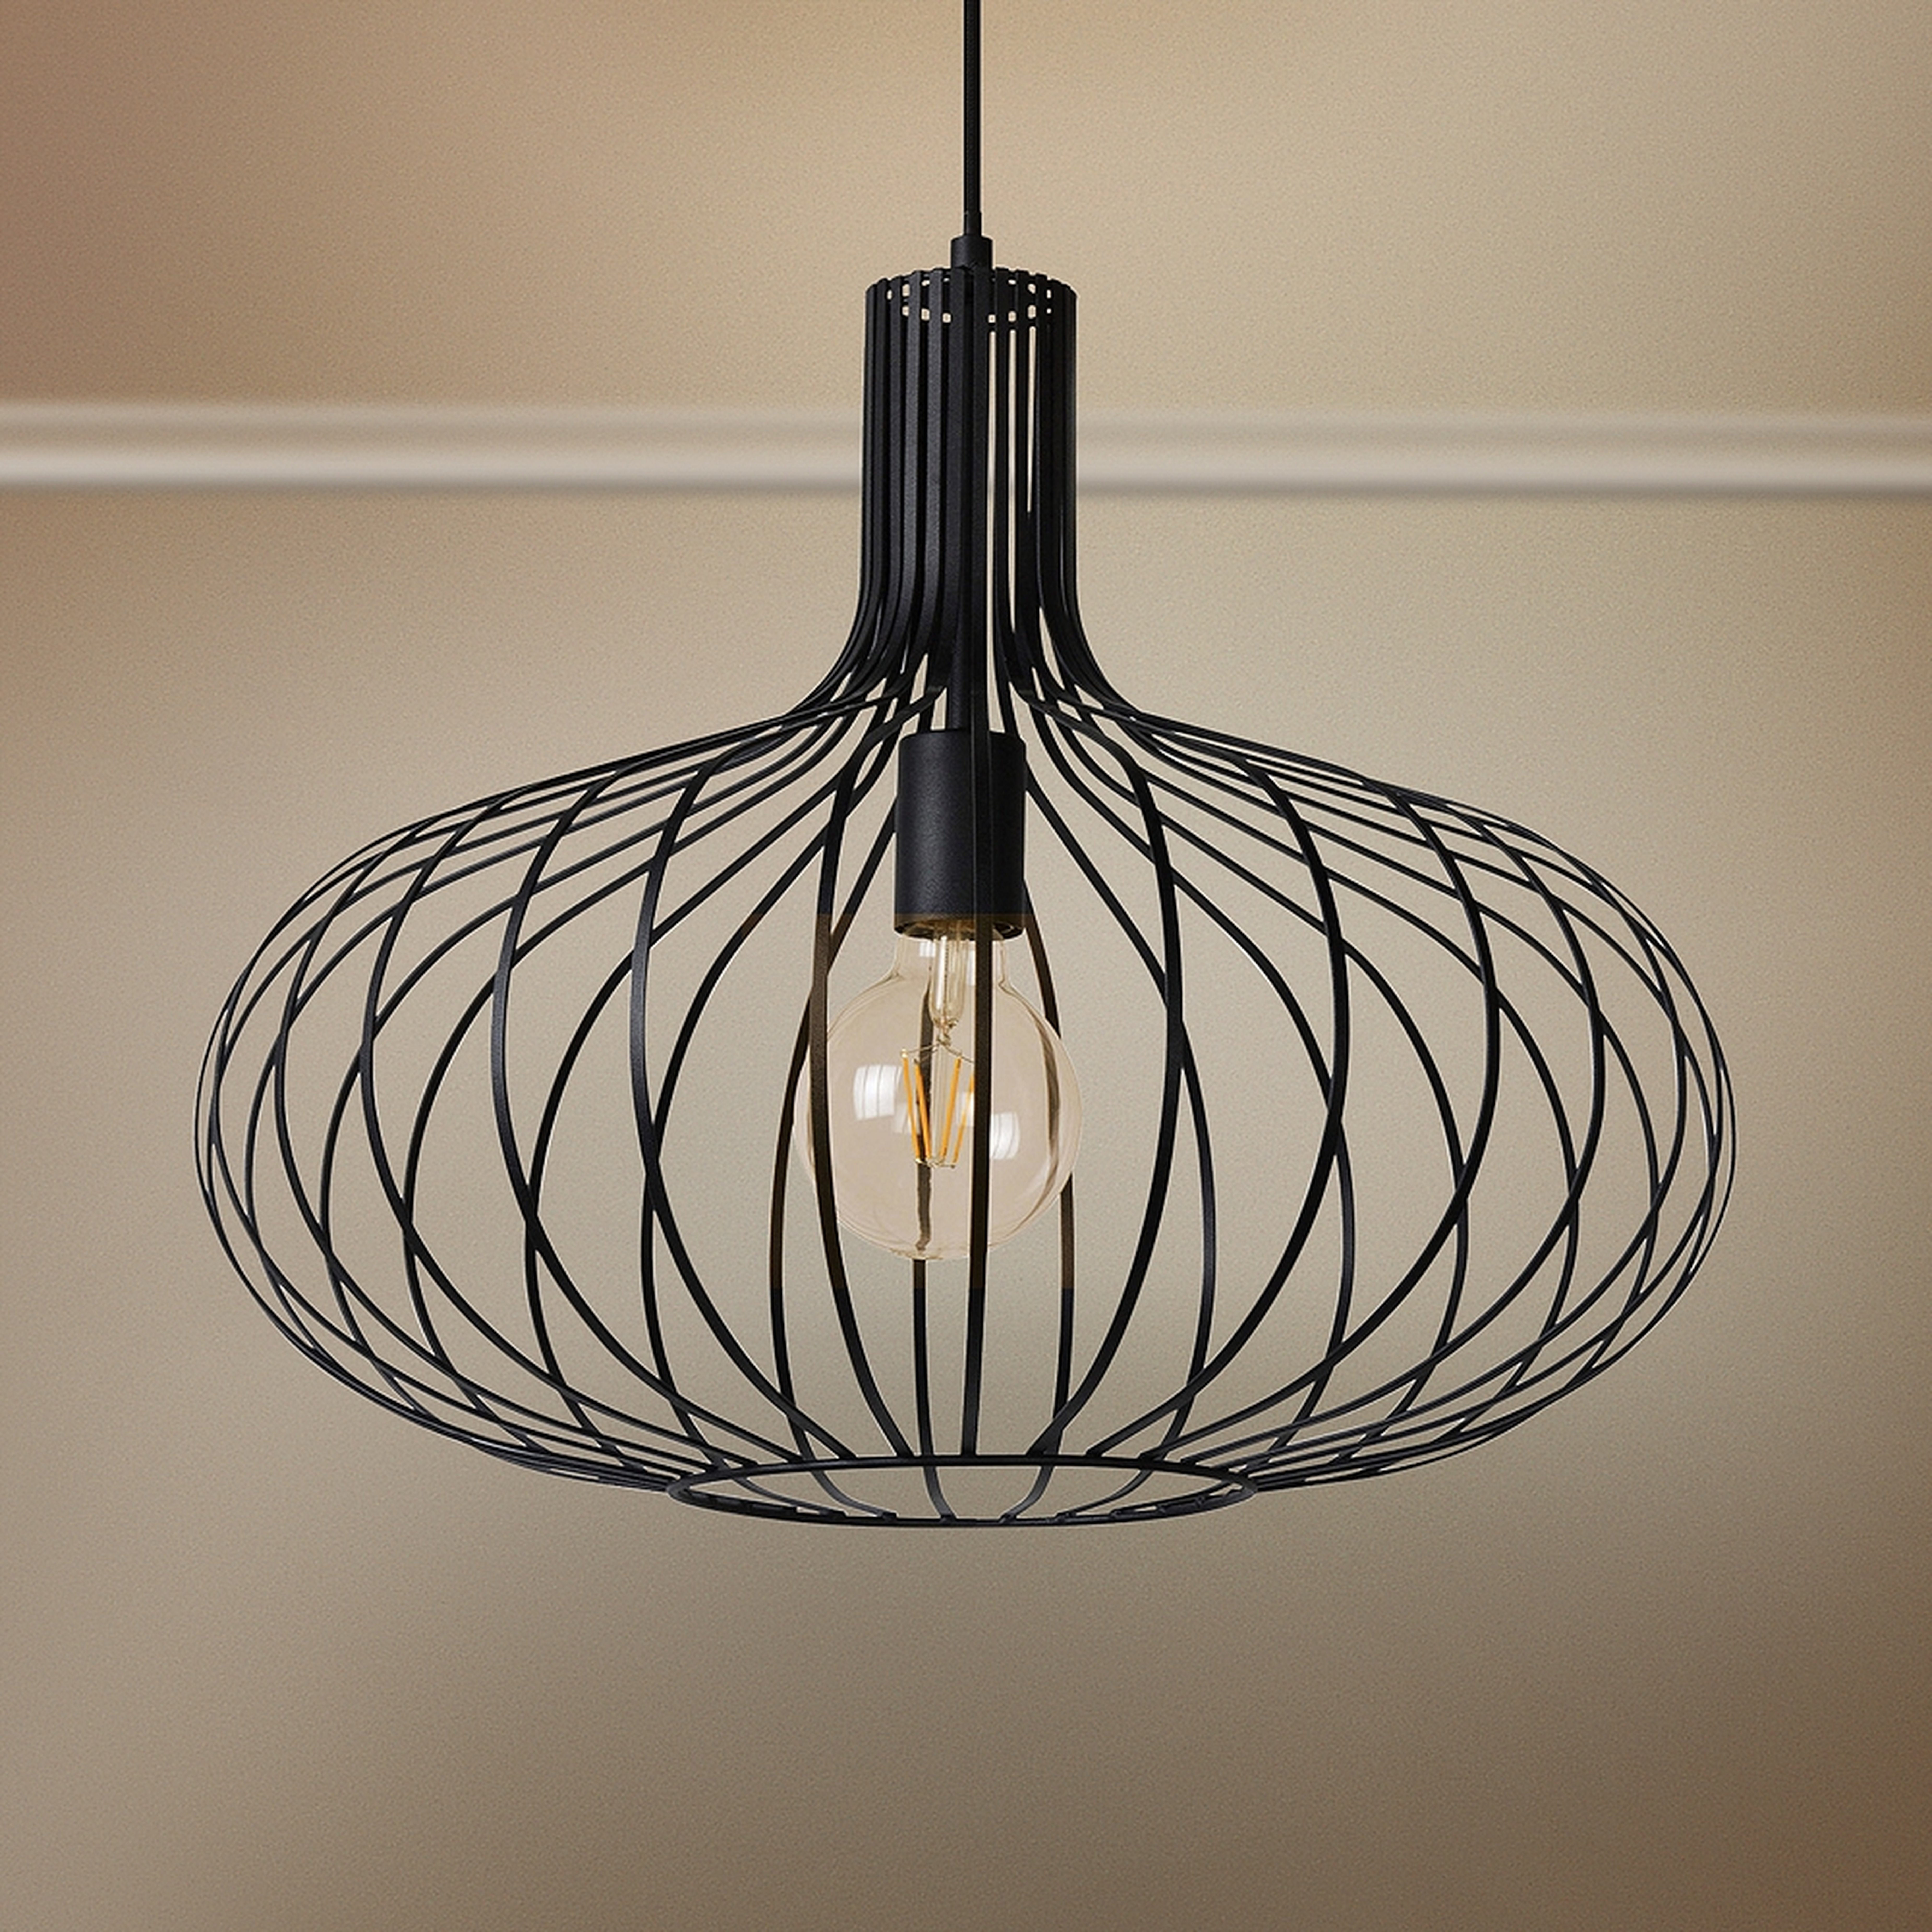 Ione 19 3/4" Wide Textured Black Open Cage Pendant Light - Style # 80J63 - Lamps Plus